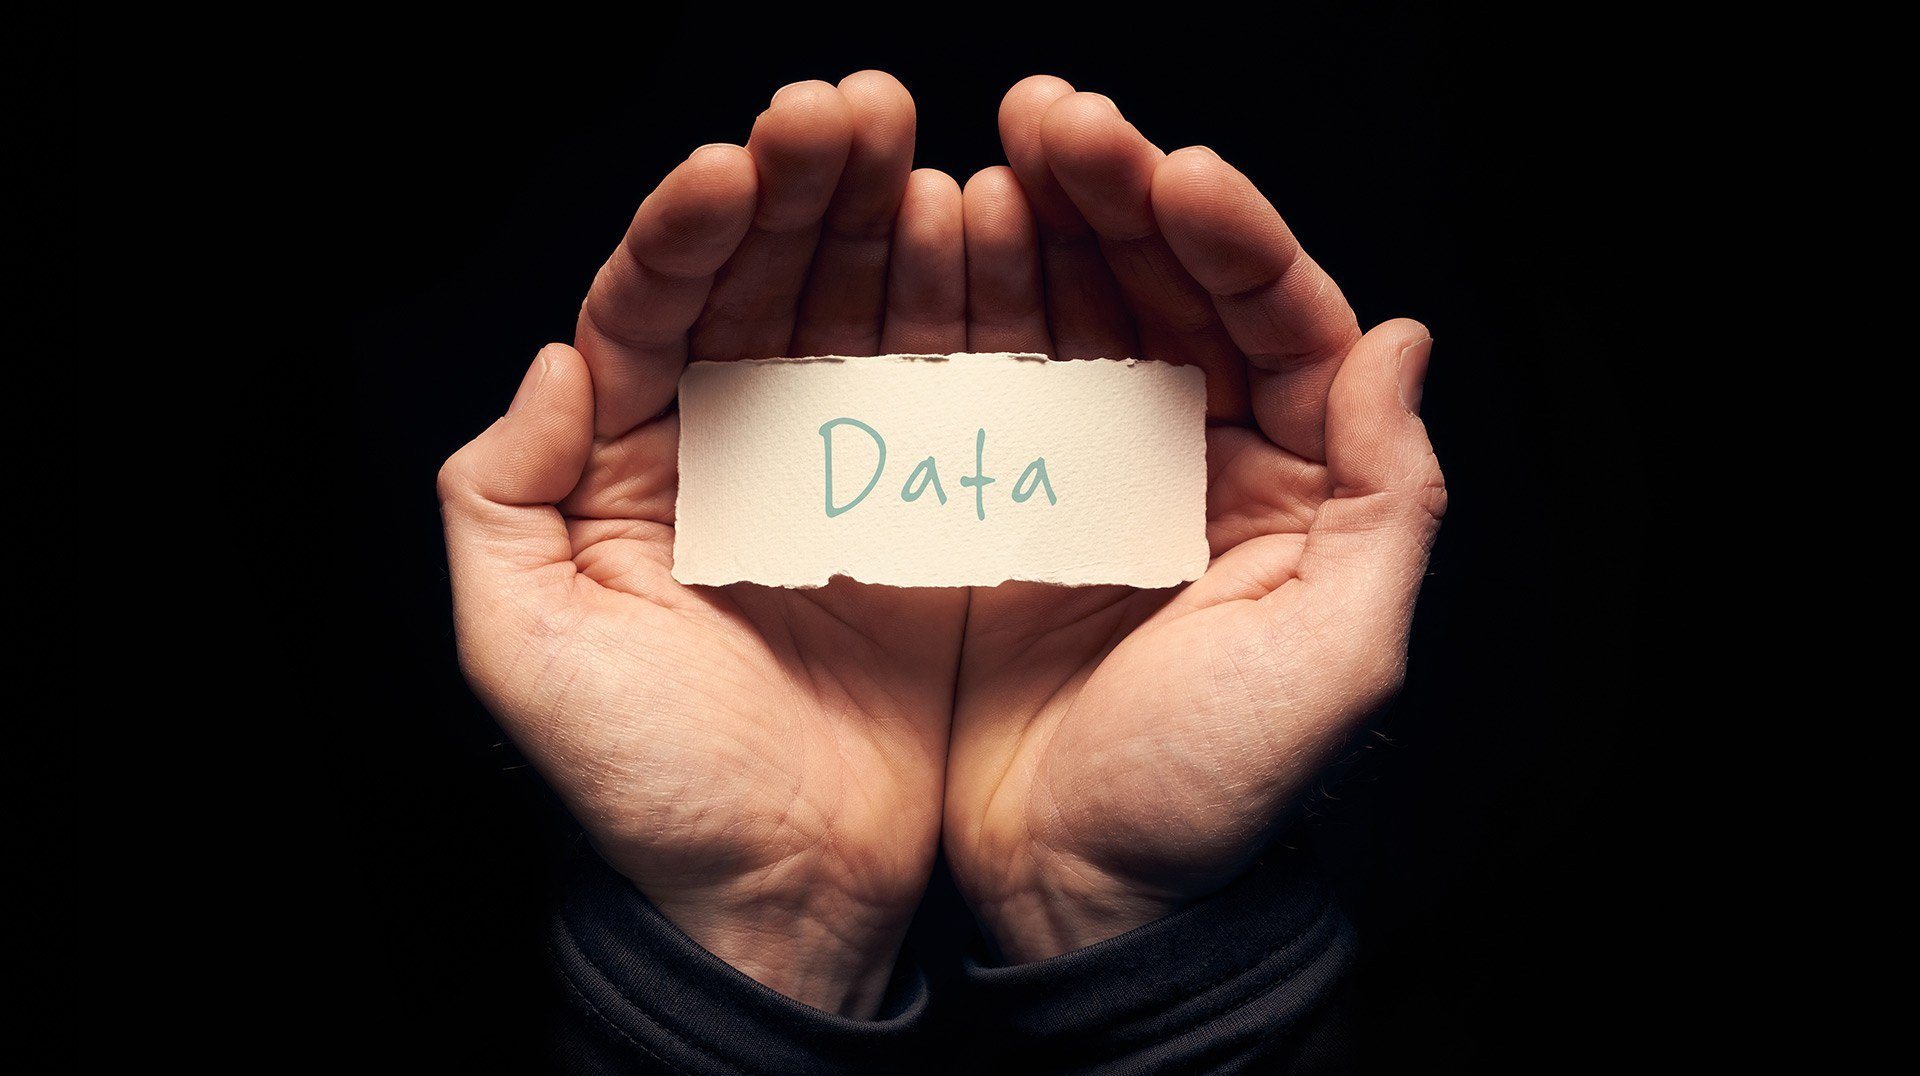 4 ways to make your data safe